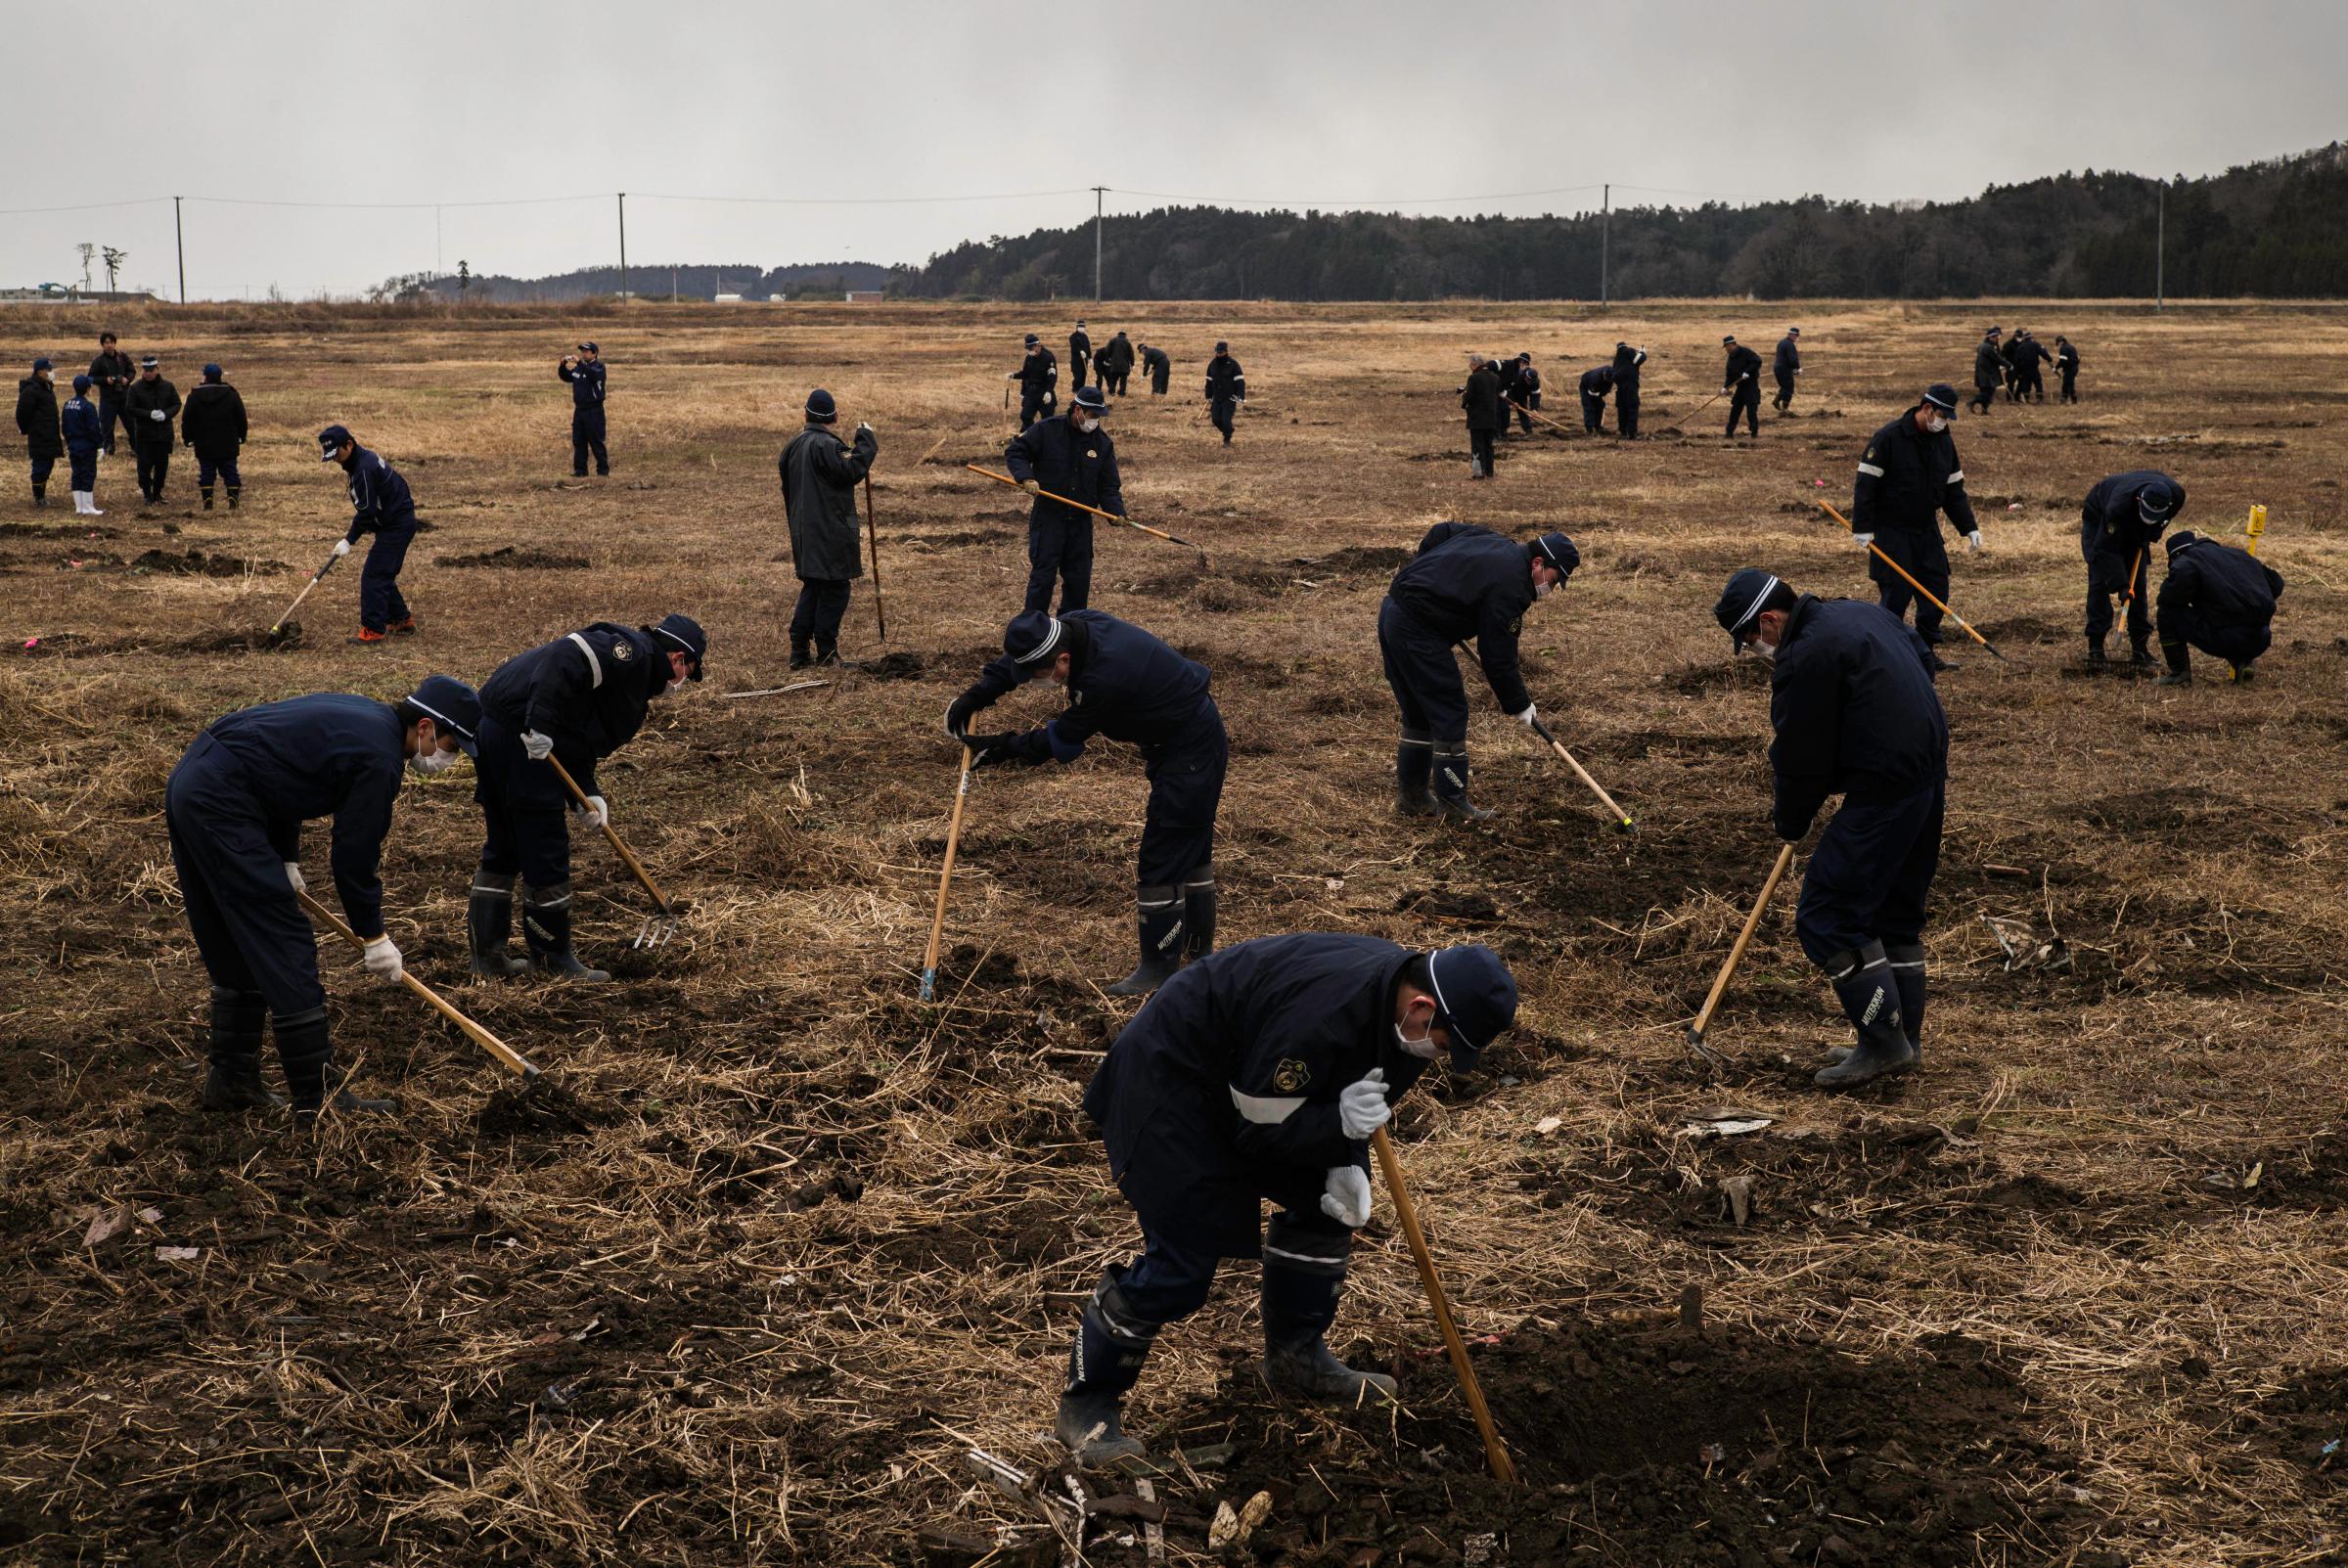 Police search inside the exclusion zone for residents who are still considered missing from the tsunami in Namie, Japan, on March 11, 2016. More than 2,500 people remain missing, according to government statistics.